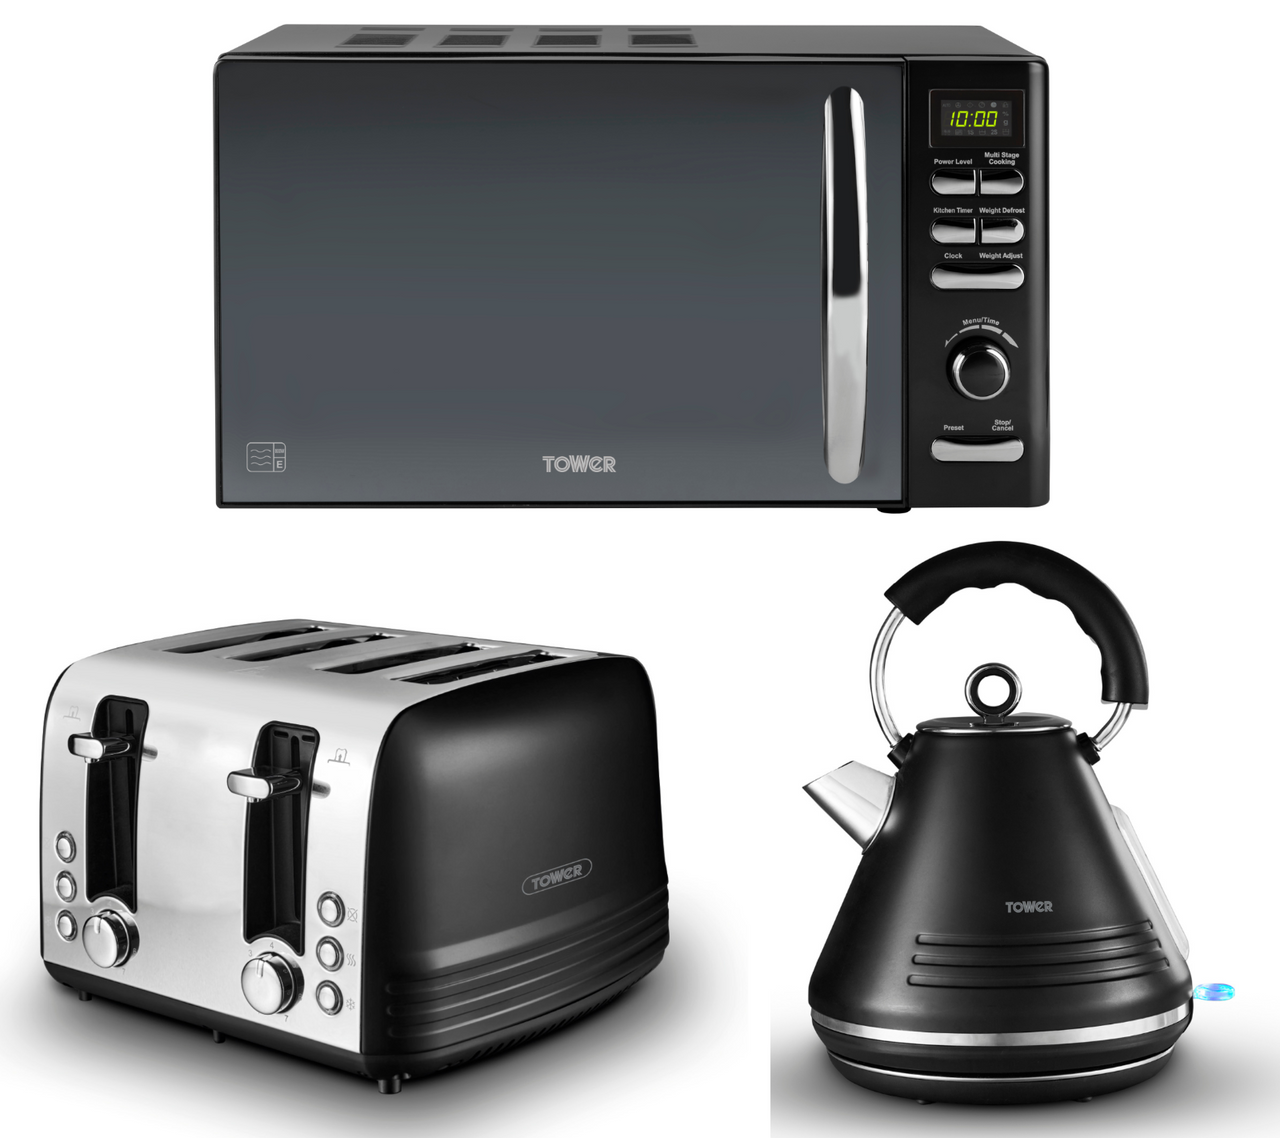 Tower Ash Black 1.7L 3KW Pyramid Kettle ,4 Slice Toaster & T24019 Infinity Microwave Matching Set